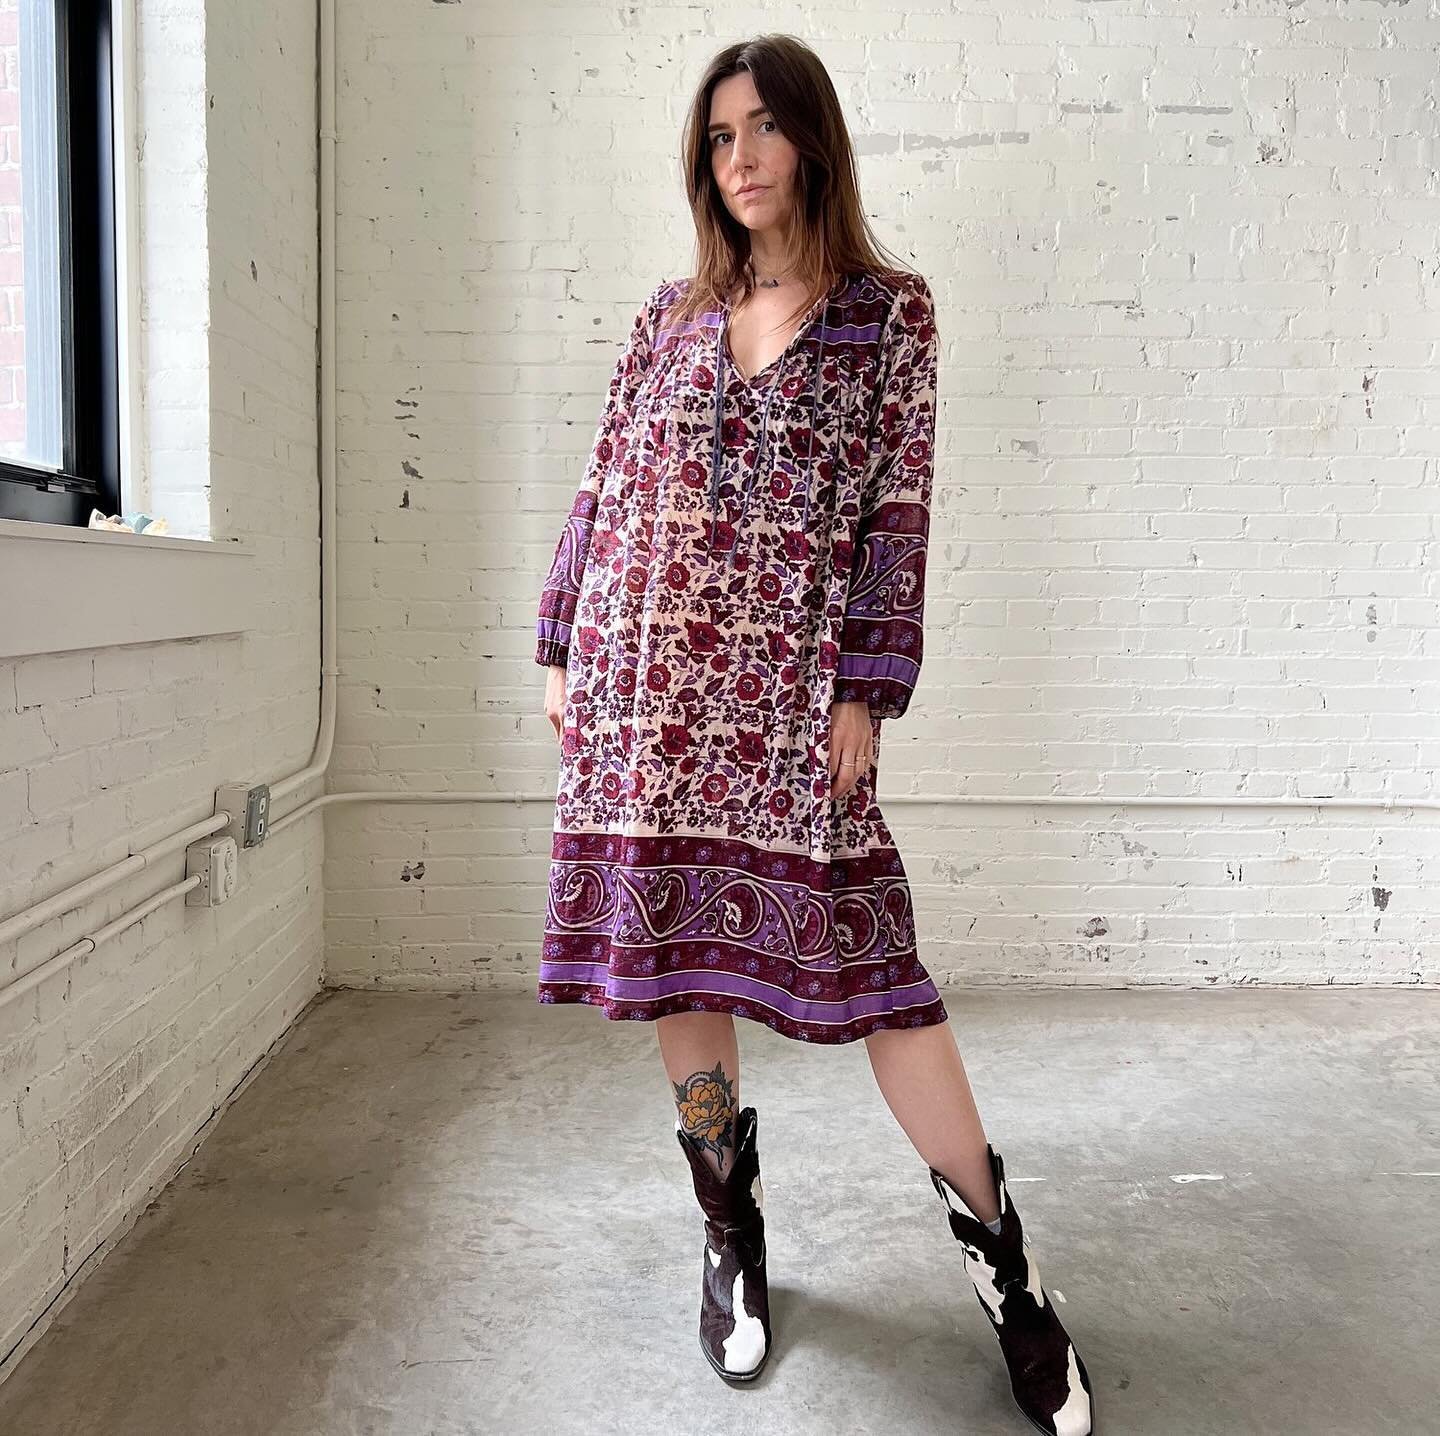 Back to it today! Love how warm it&rsquo;s getting! I find myself reaching for lightweight dresses and boots this time of year, either layered with a denim jacket or cozy sweater for the cooler morning temps. Indian cotton dresses like this are my fa